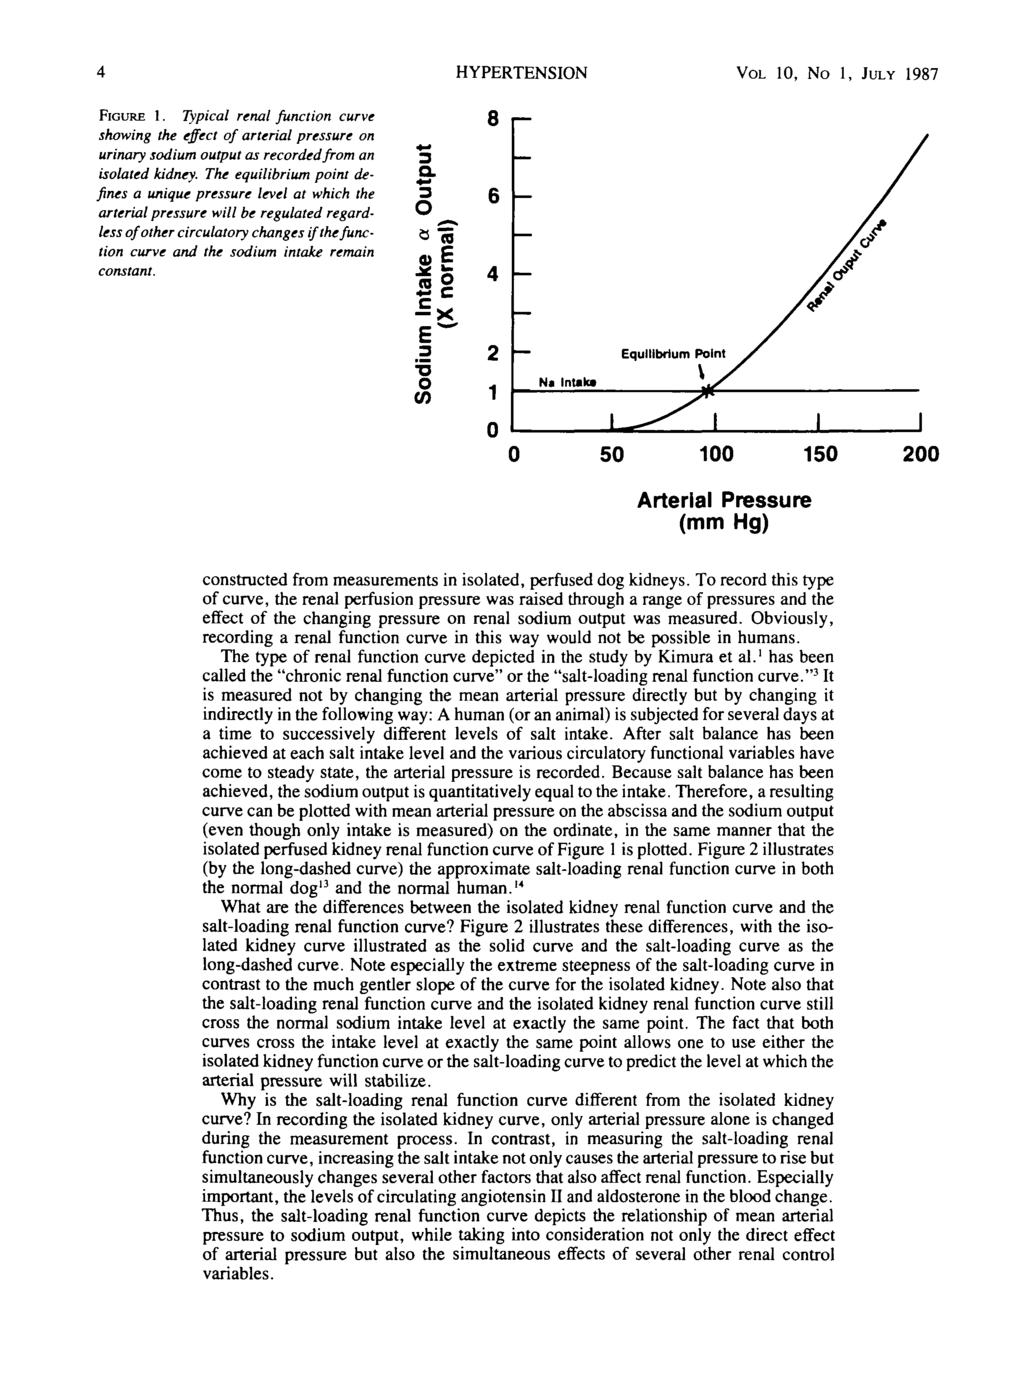 HYPERTENSION VOL 10, No 1, JULY 1987 FIGURE 1. Typical renal function curve showing the effect of arterial pressure on urinary sodium output as recorded from an isolated kidney.